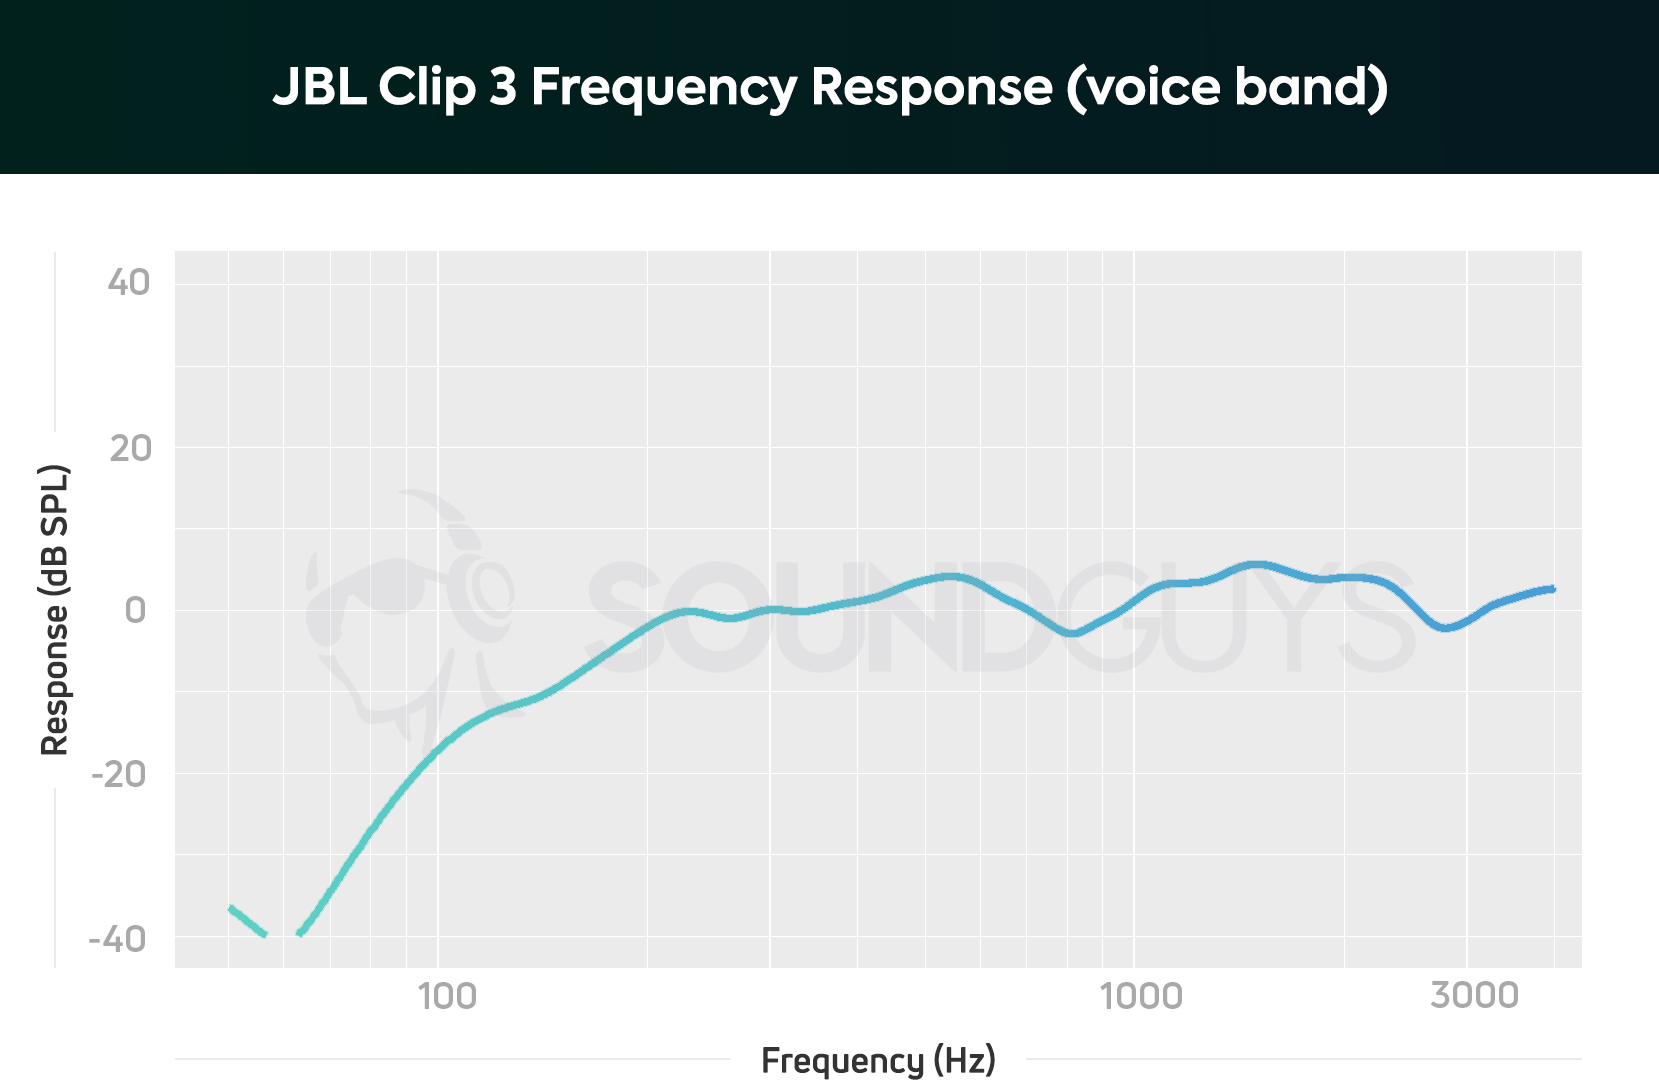 Voice frequency response of the JBL Clip 3.